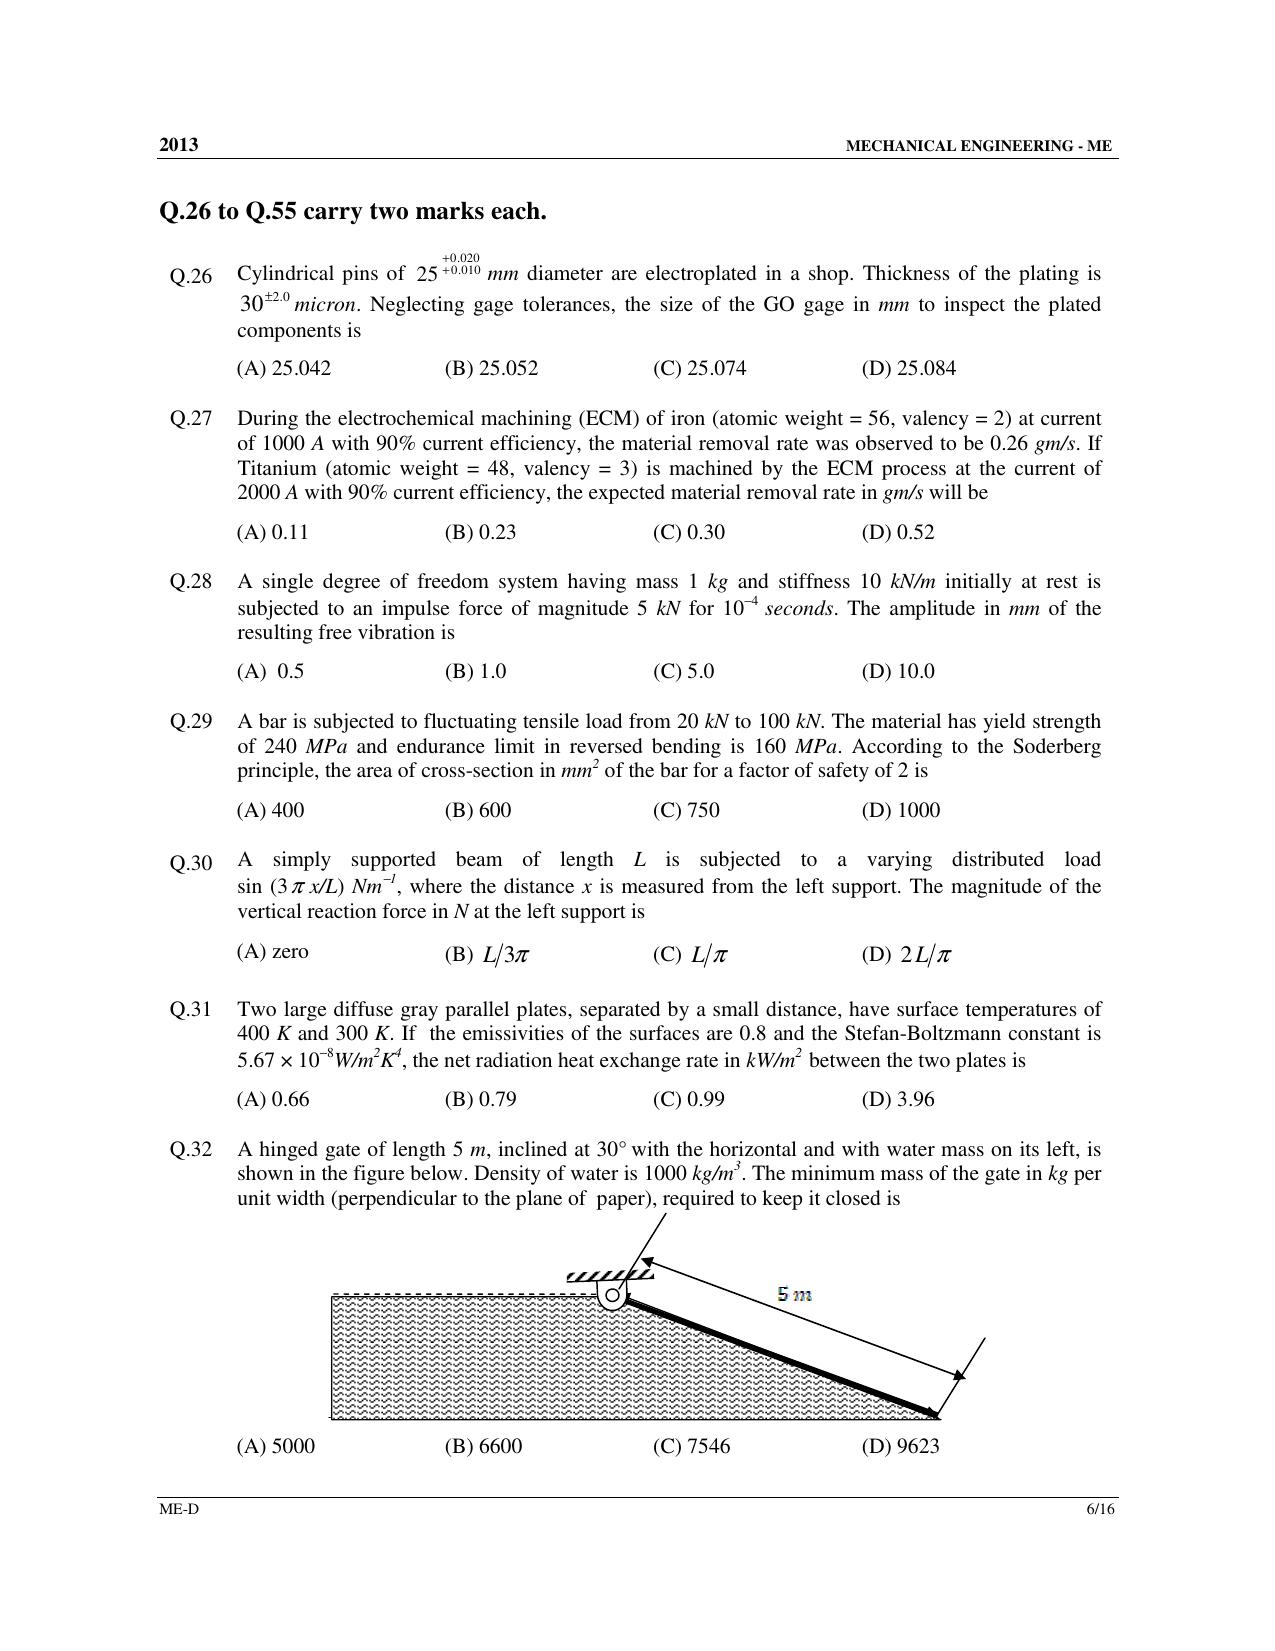 GATE 2013 Mechanical Engineering (ME) Question Paper with Answer Key - Page 49